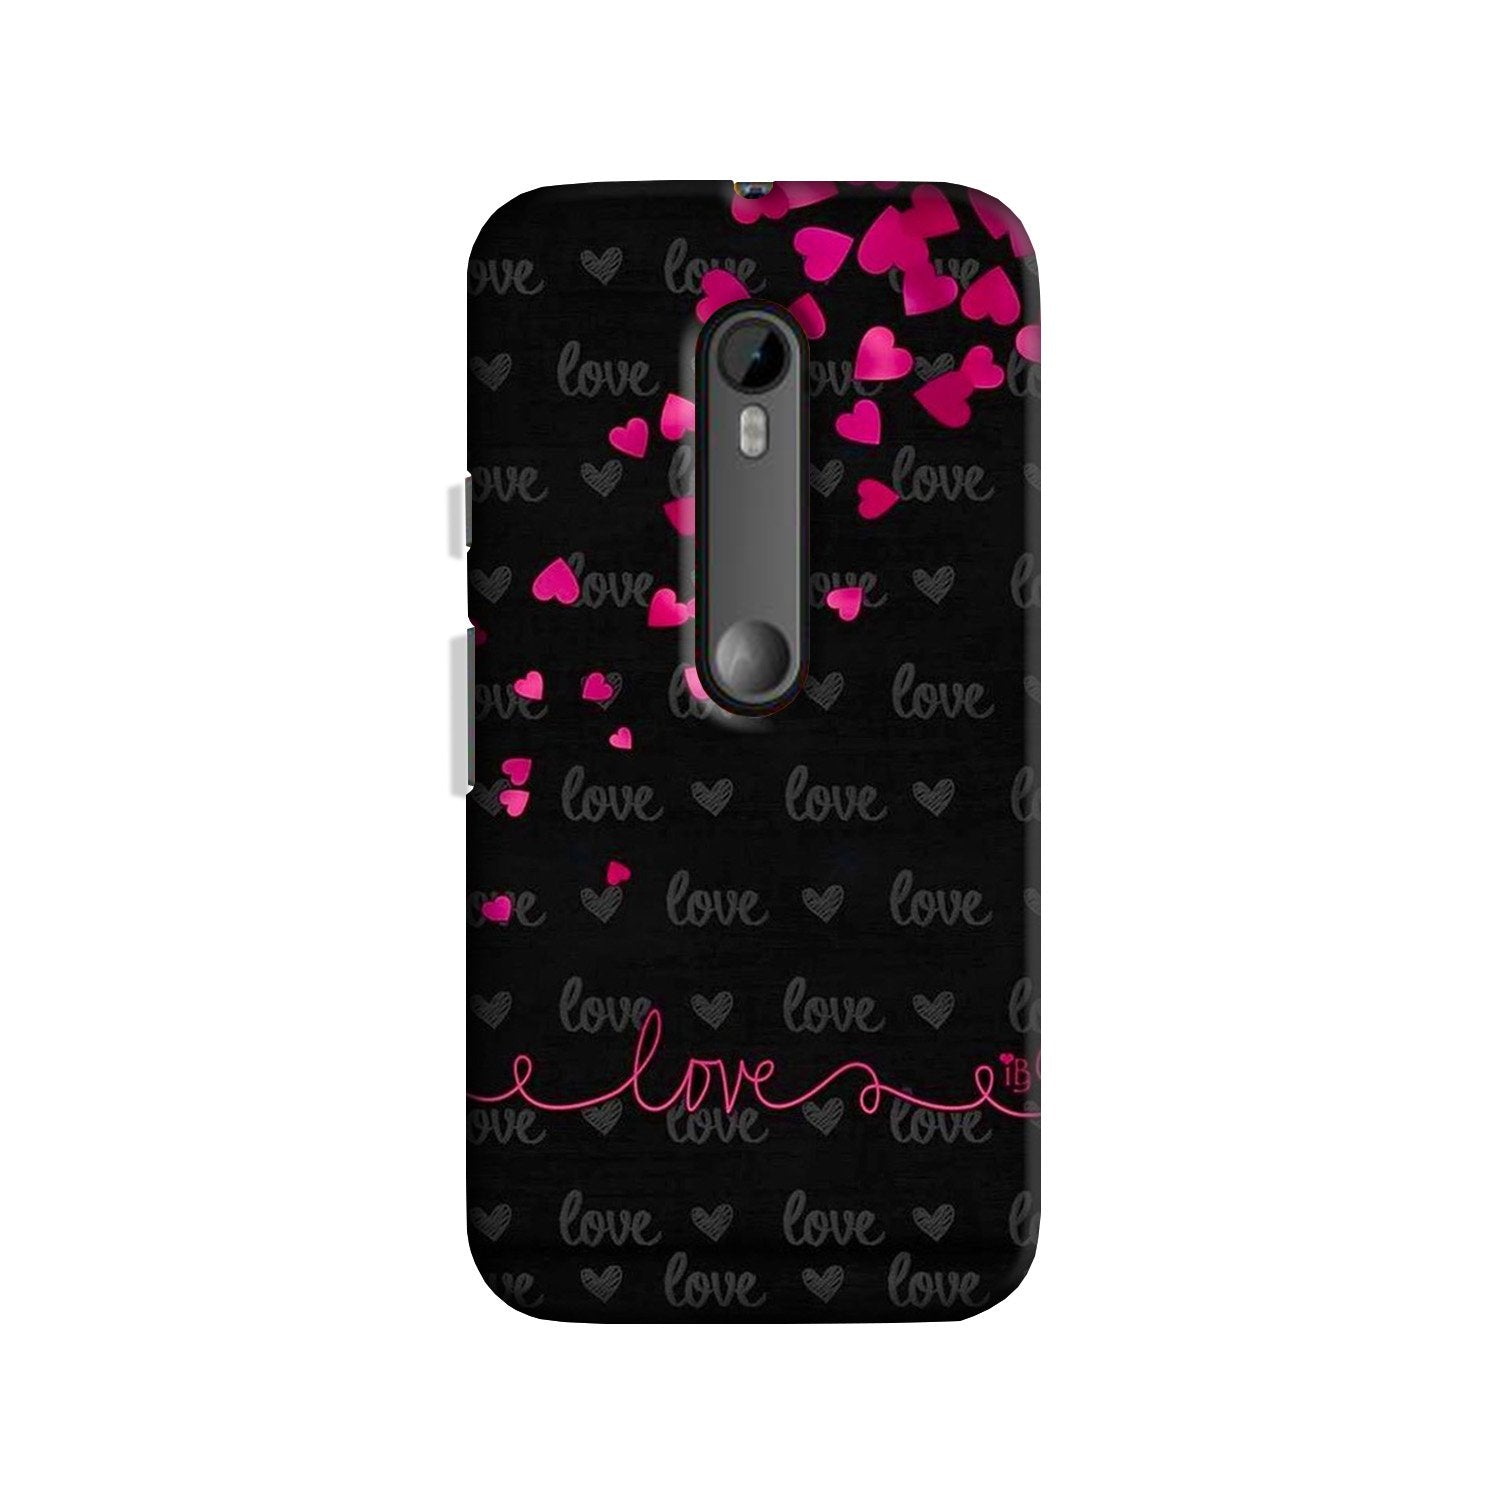 Love in Air Case for Moto G3